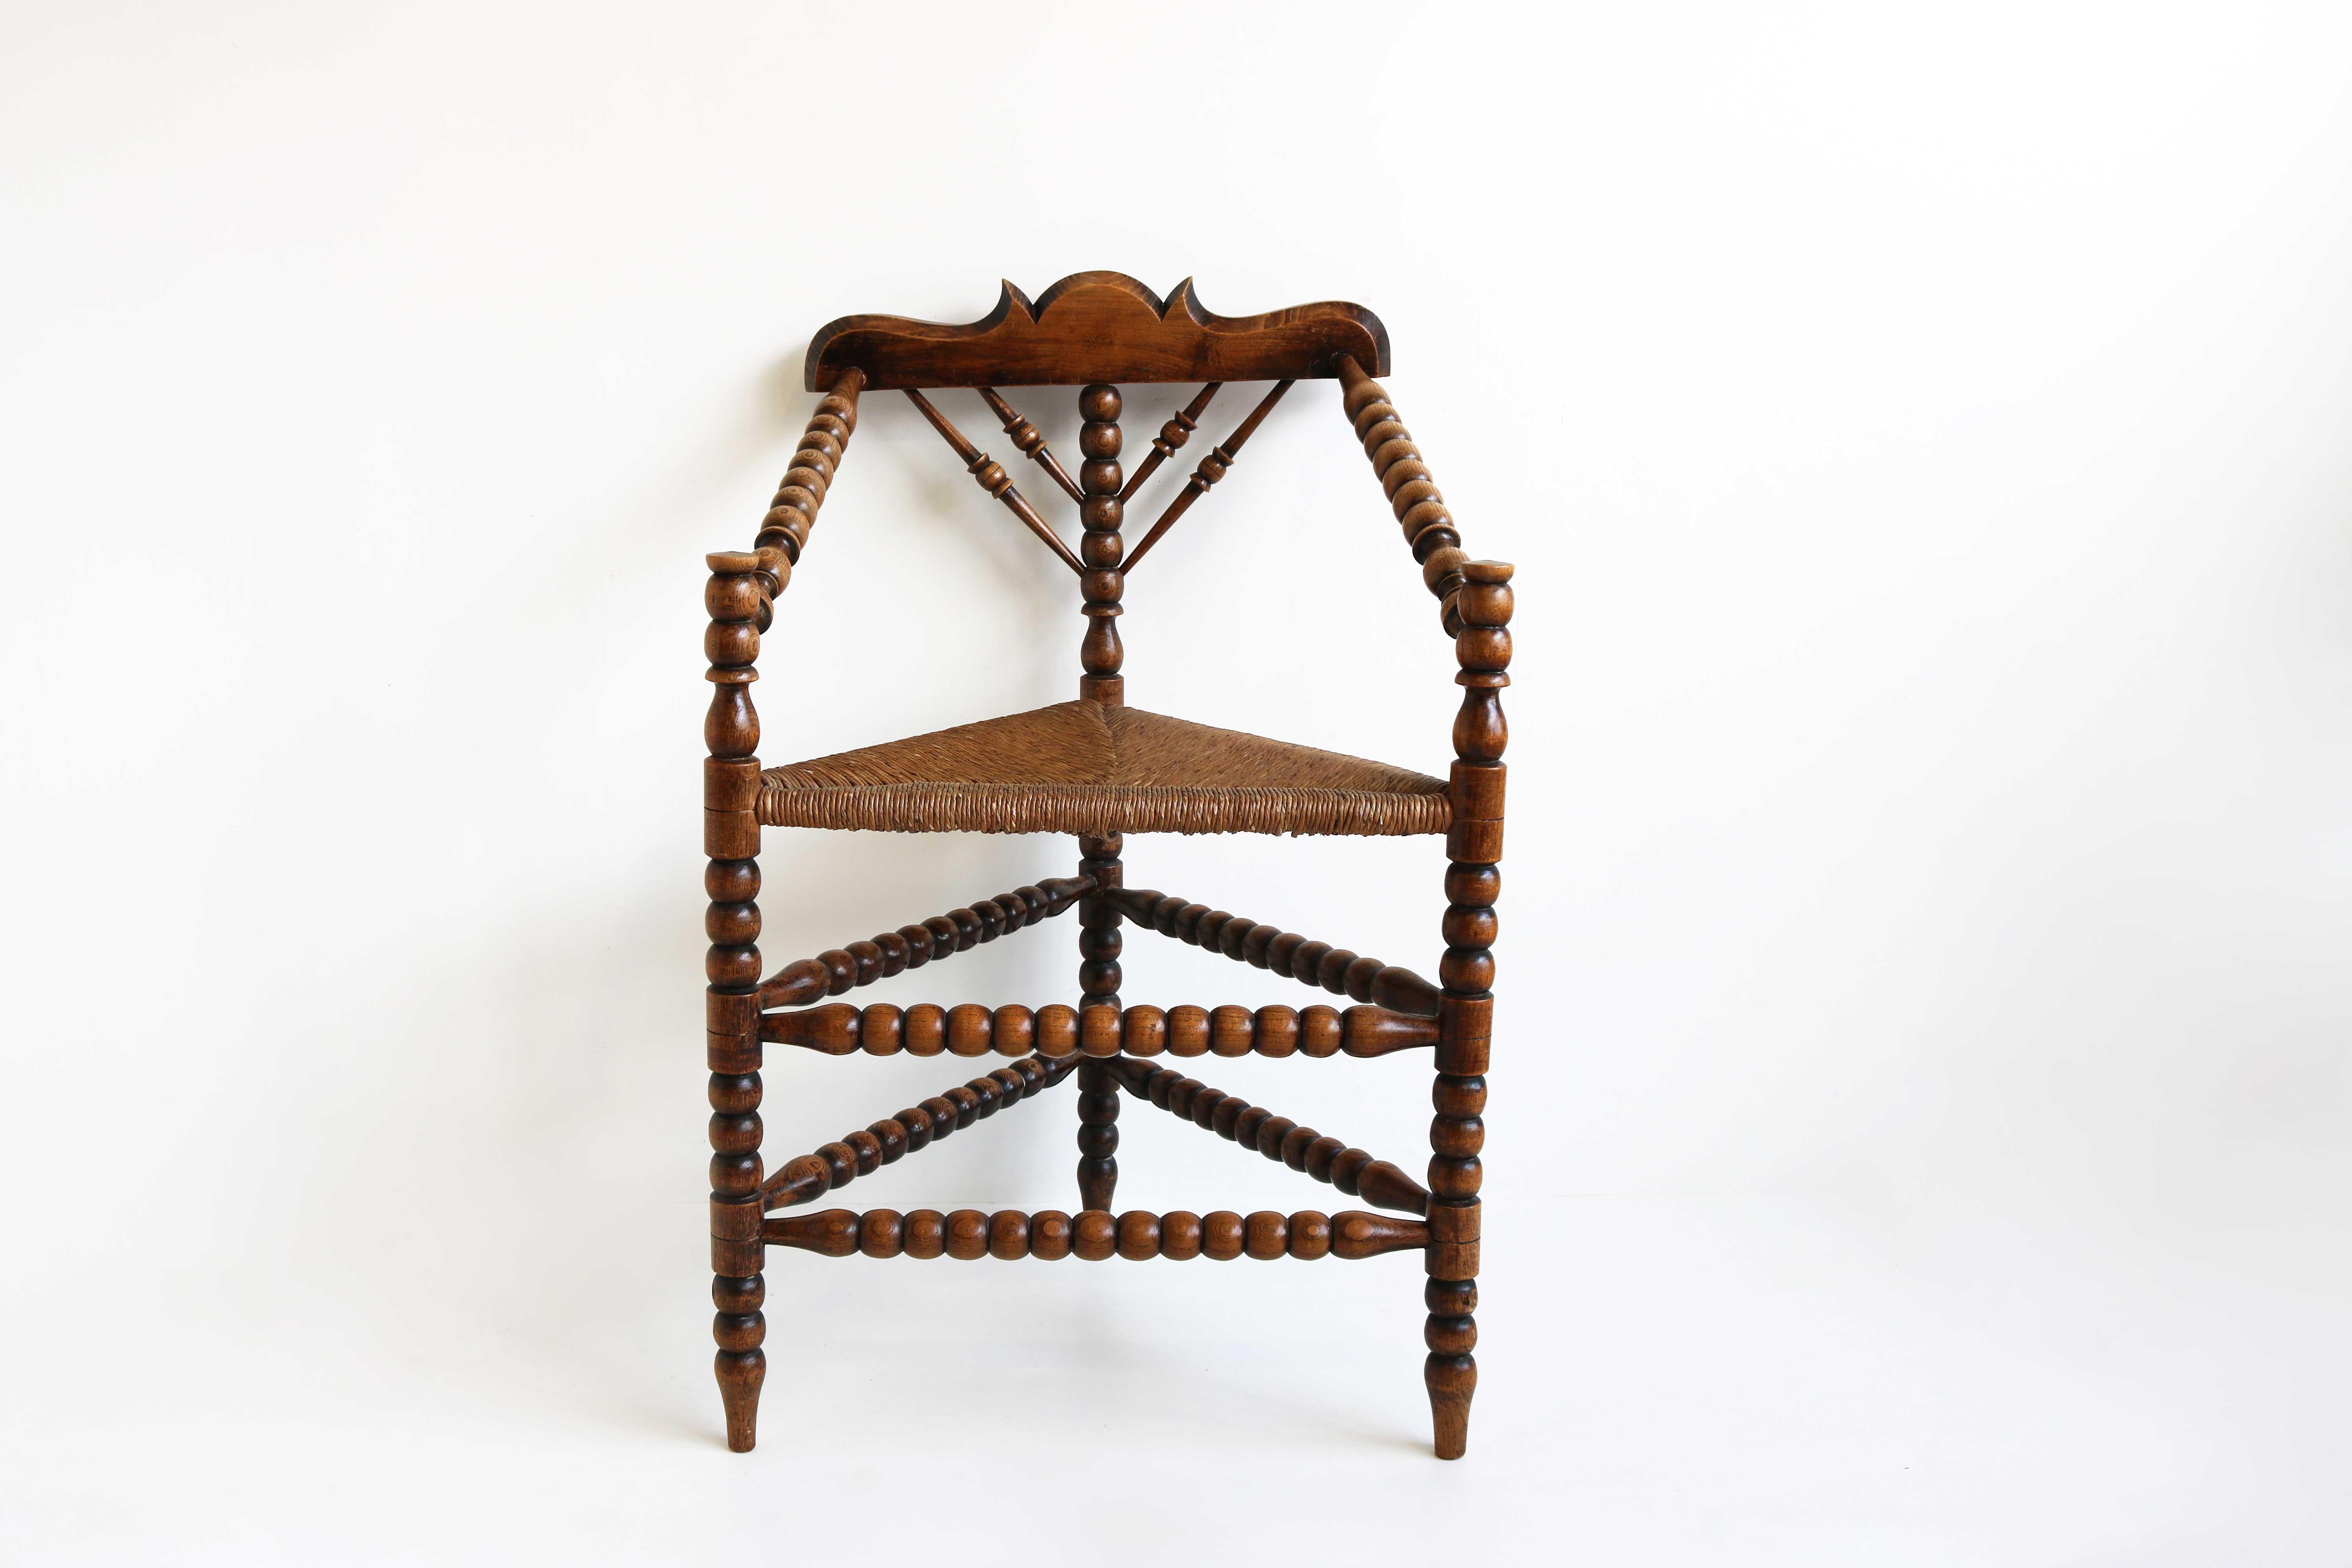 Late 19th century bobbin turned wood armchair with rush seat, ca 1900
Manufactured in The Netherlands.
Beautiful antique bobbin/ knitting chair with three legs.
This old Dutch chair with three legs is called a knitting chair.
Because of the